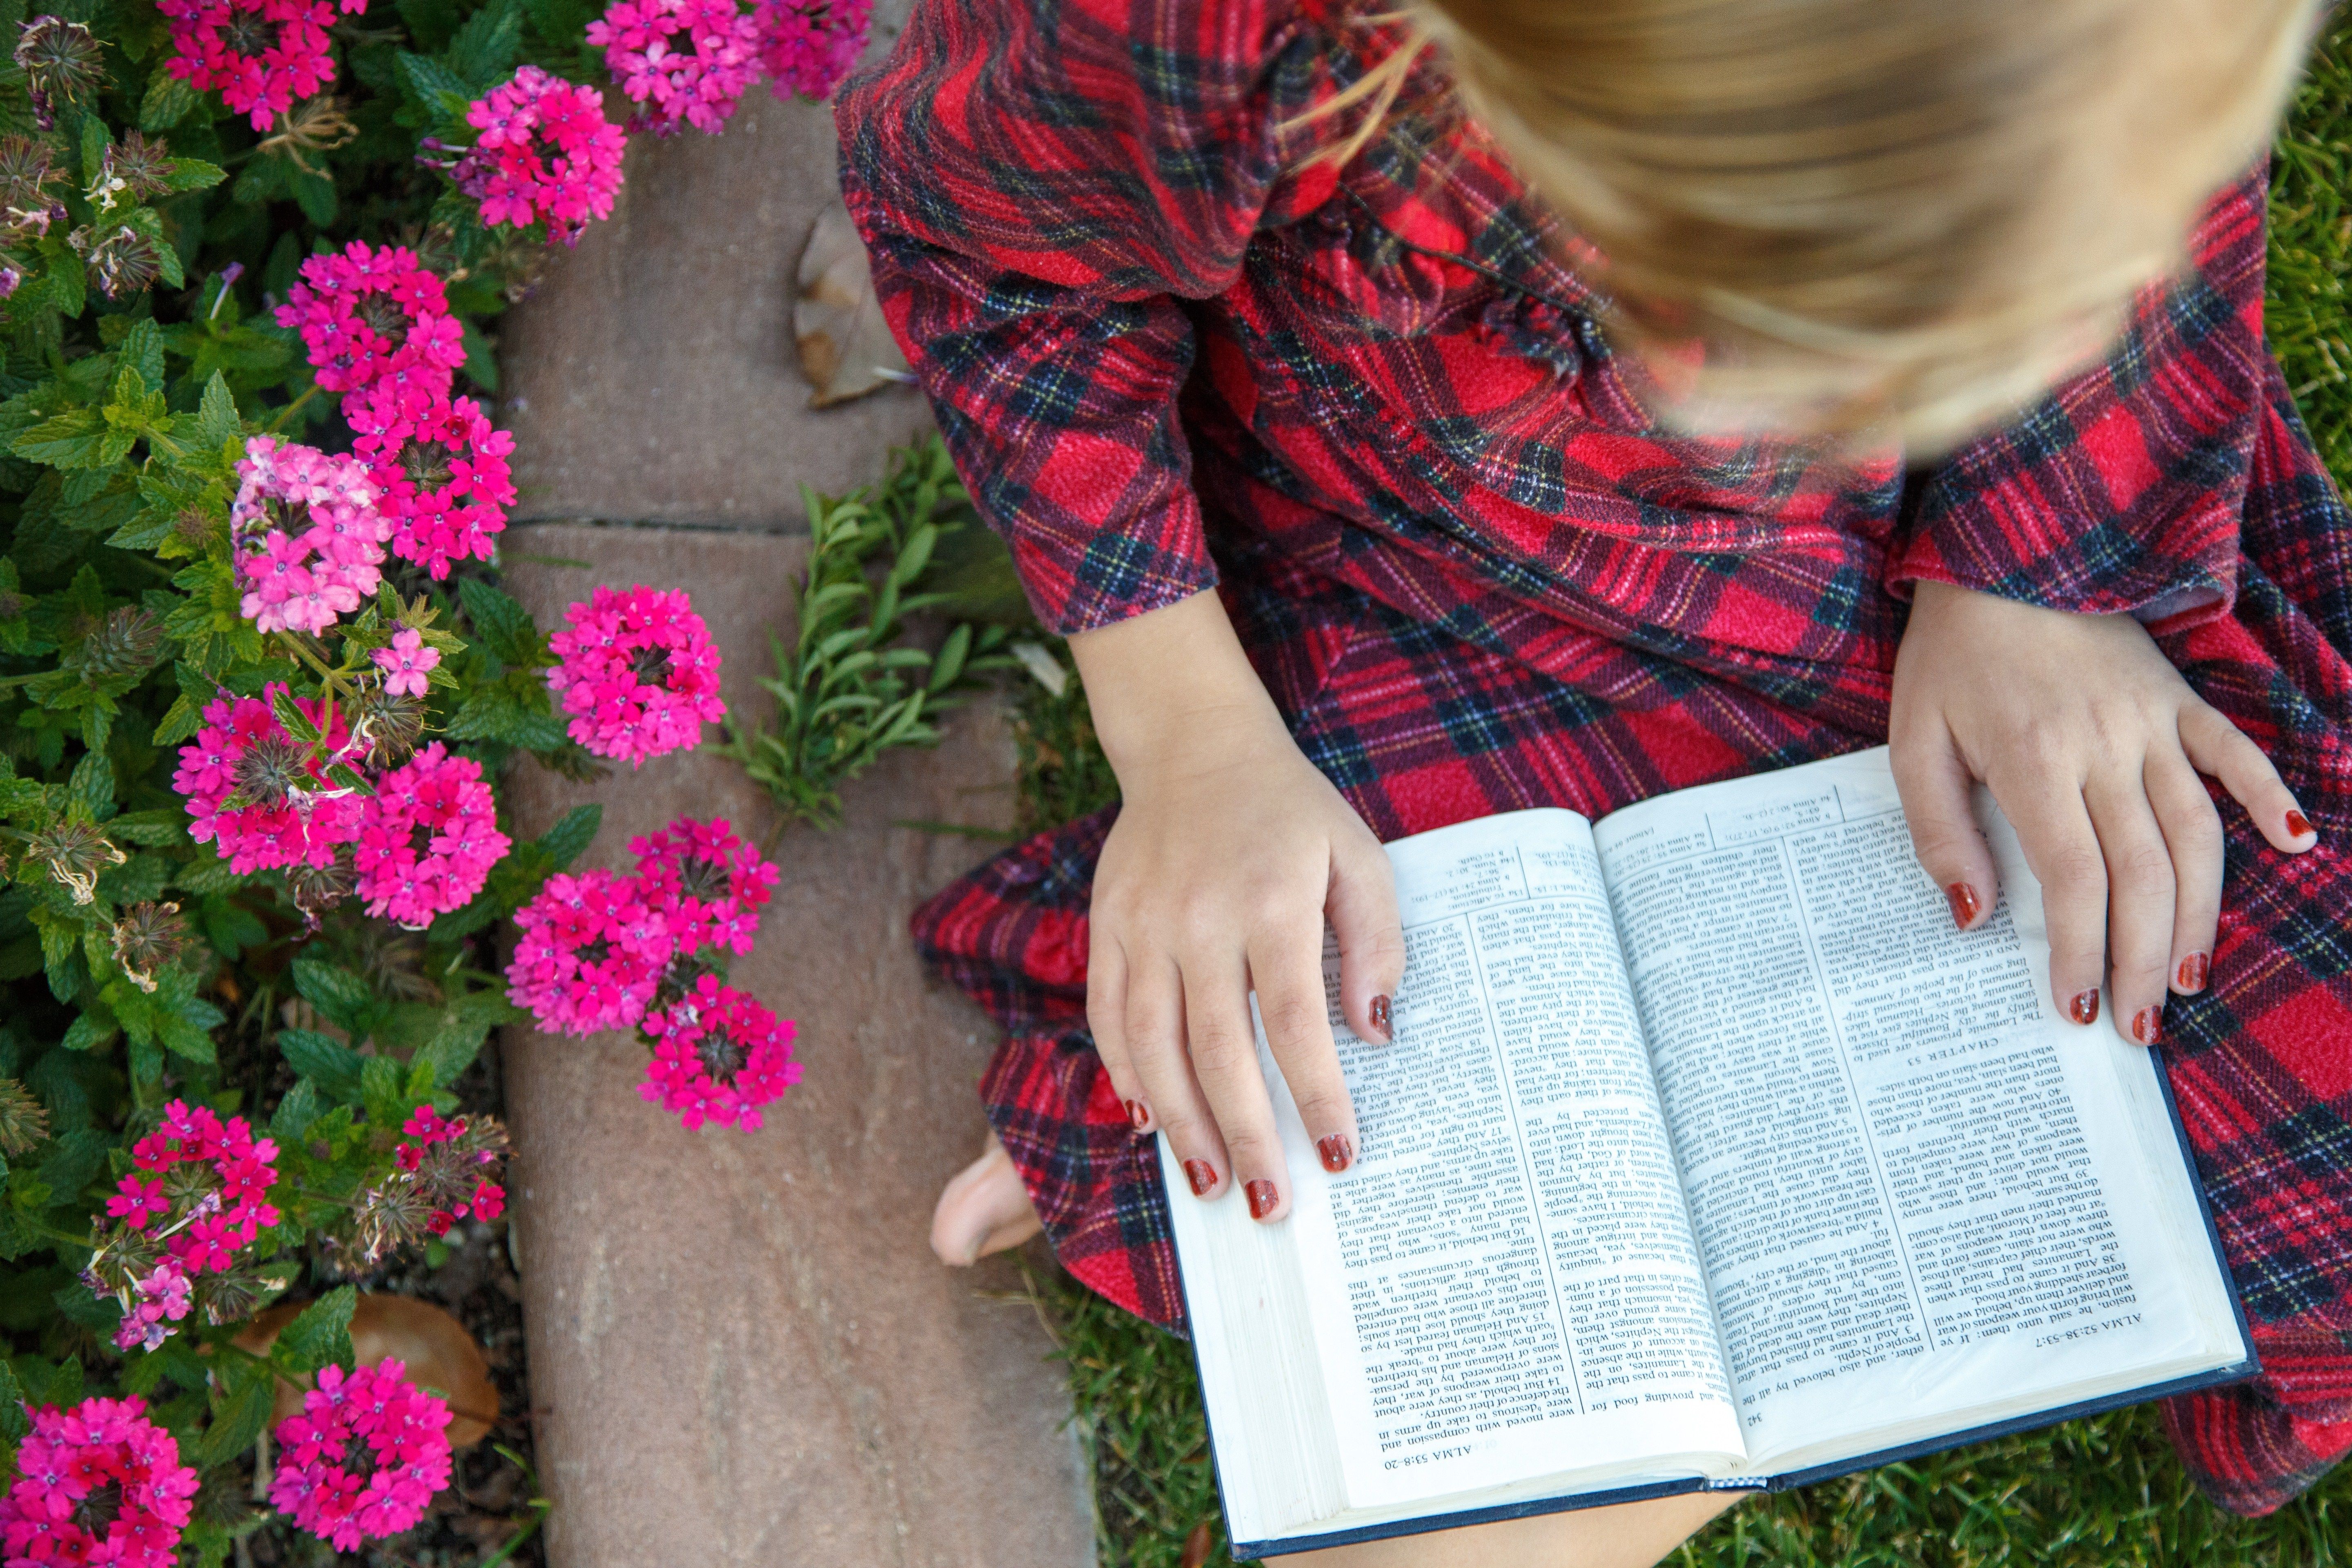 A young girl sits in a garden and reads the Book of Mormon.